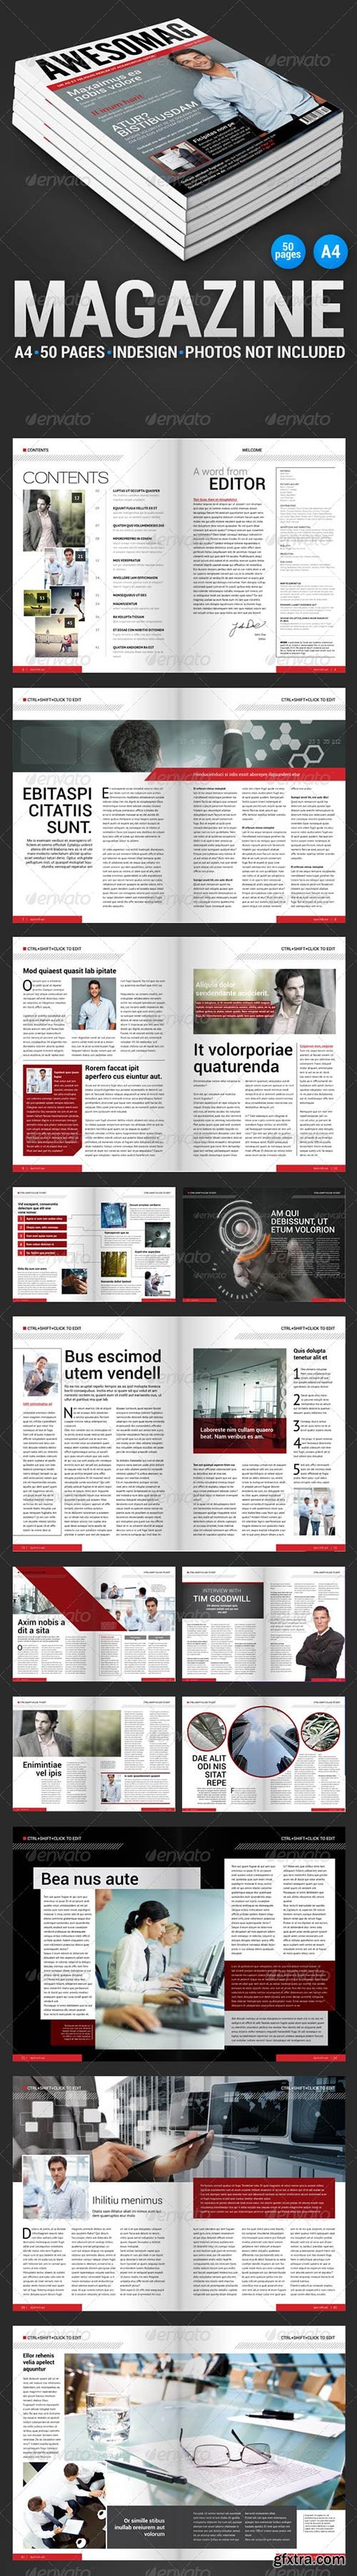 GraphicRiver - AwesoMag 50 pages magazine 4299849